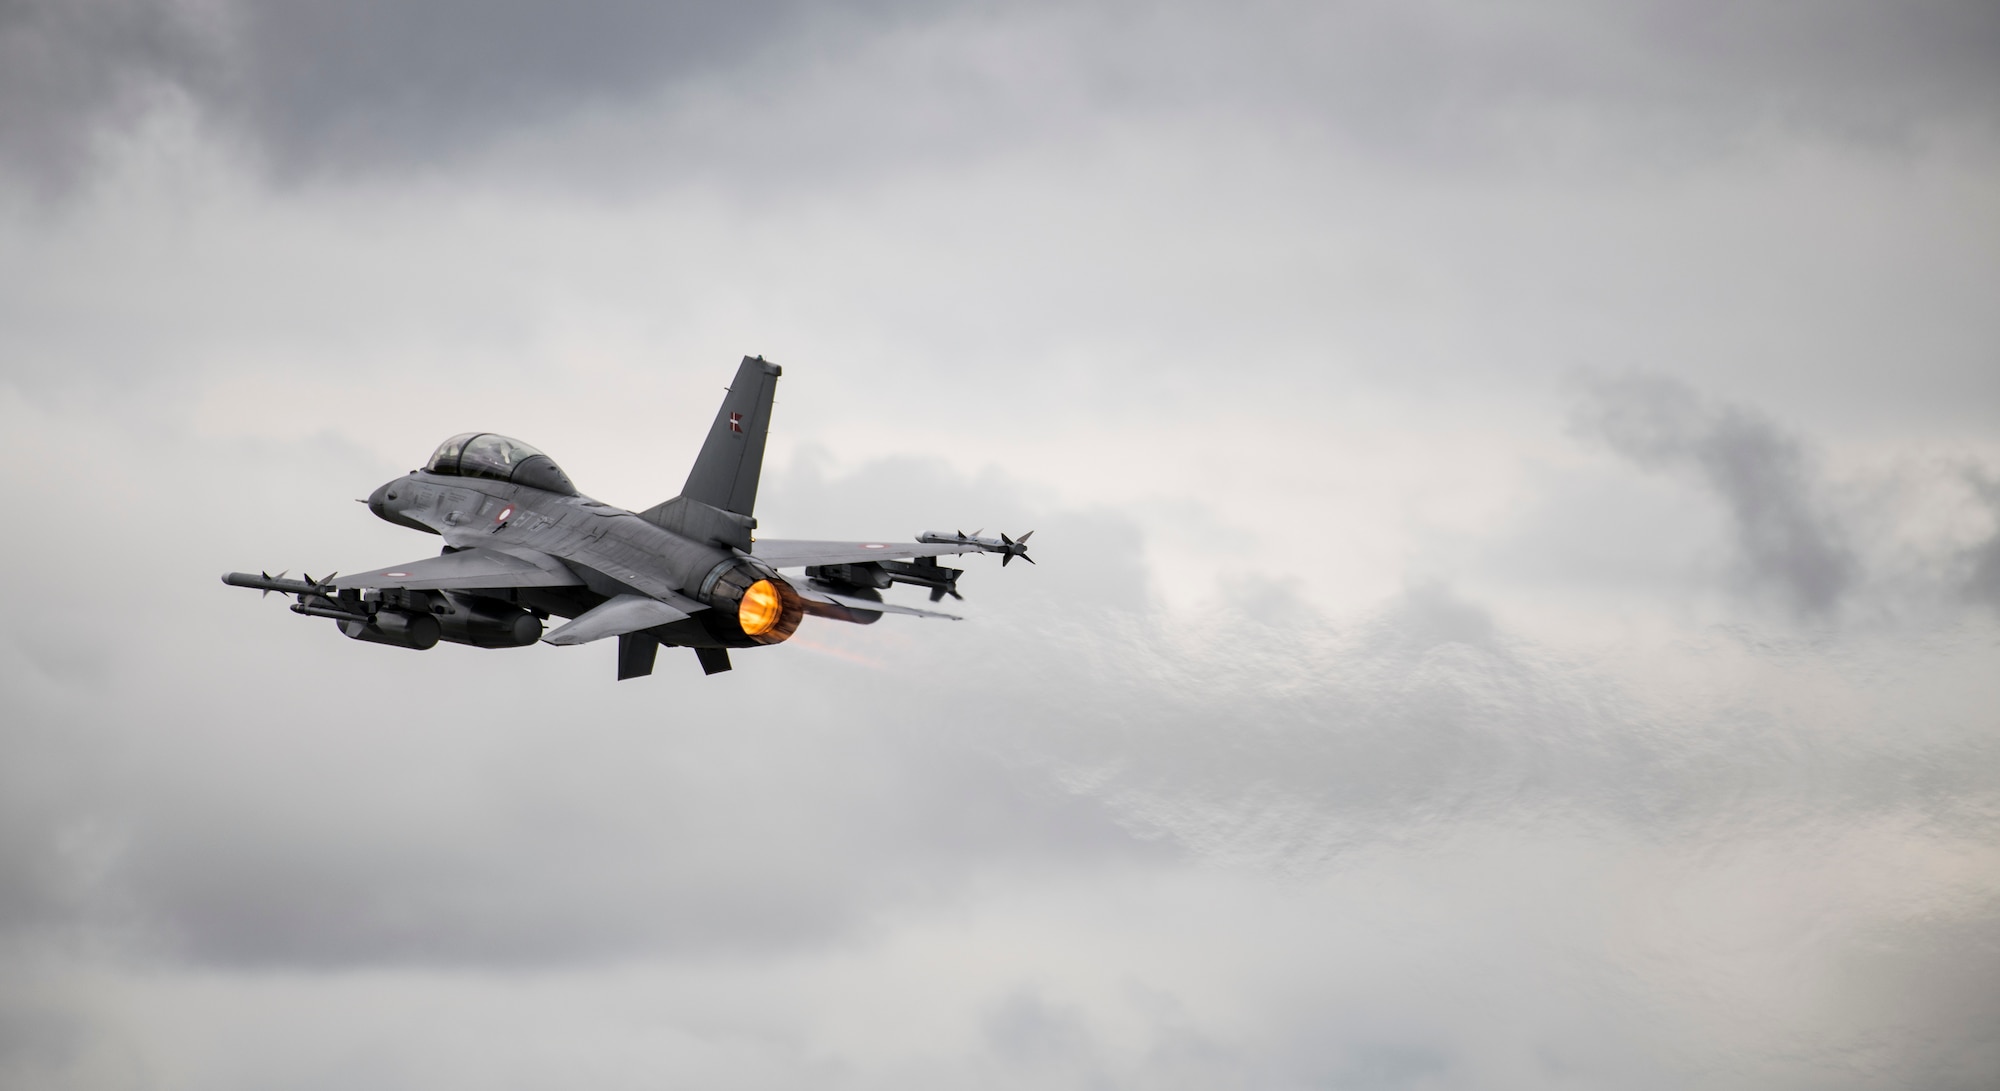 A Danish Air Force General Dynamics F-16AM/BM Fighting Falcon flies past the audience during the NATO 70th Anniversary Flypast at the 2019 Royal International Air Tattoo at RAF Fairford, England, July 20, 2019. This year, RIAT commemorated the 70th anniversary of NATO and highlighted the United States' enduring commitment to its European allies. (U.S. Air Force photo by Airman 1st Class Jennifer Zima)